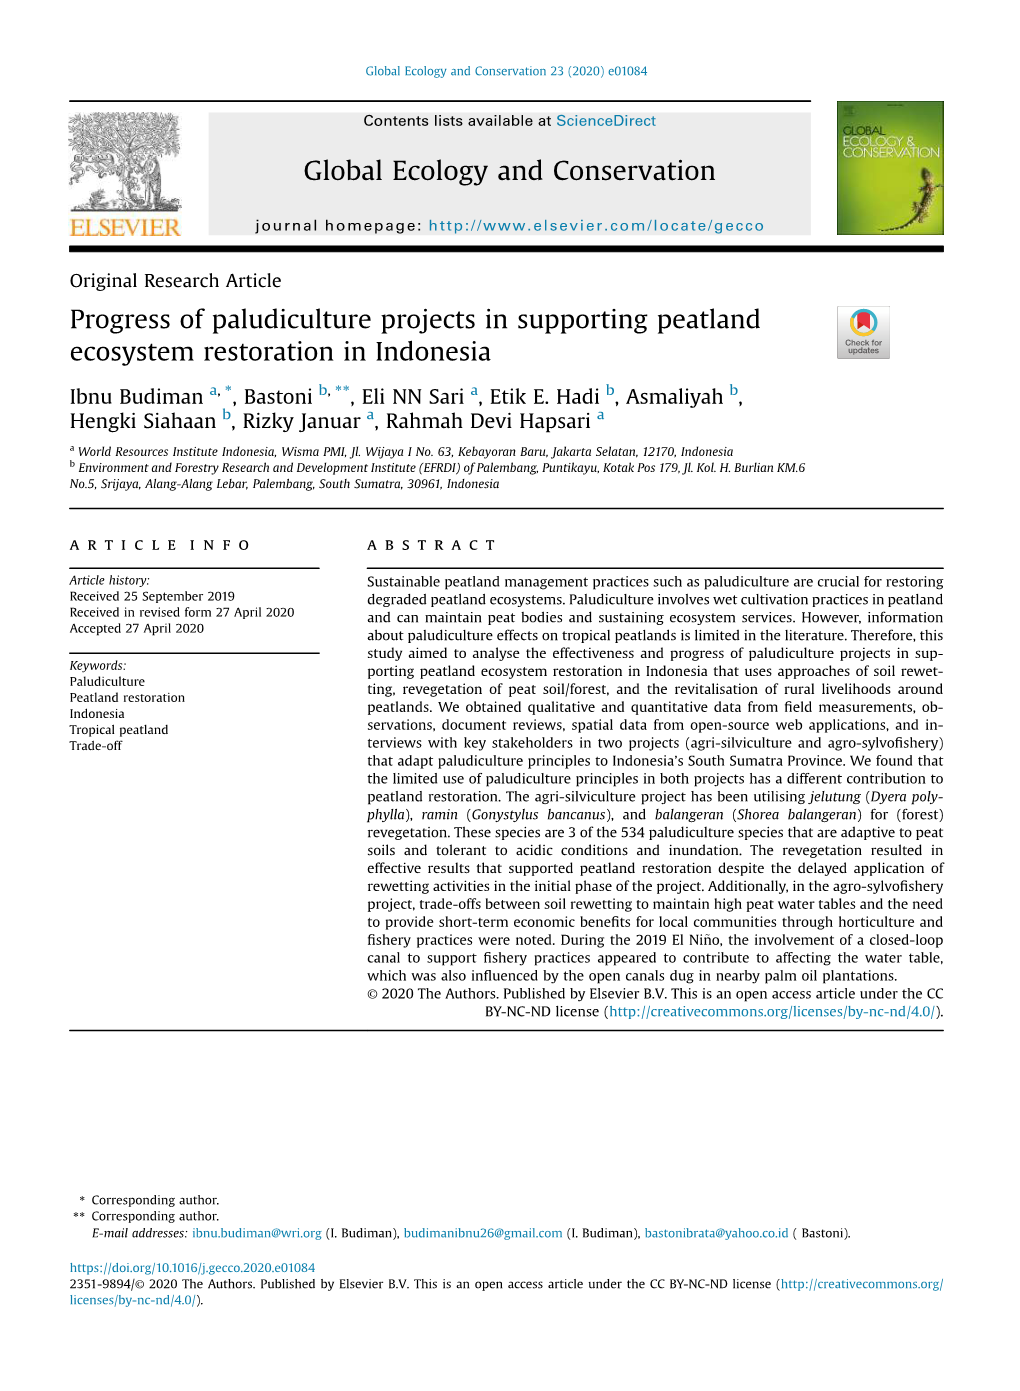 Progress of Paludiculture Projects in Supporting Peatland Ecosystem Restoration in Indonesia